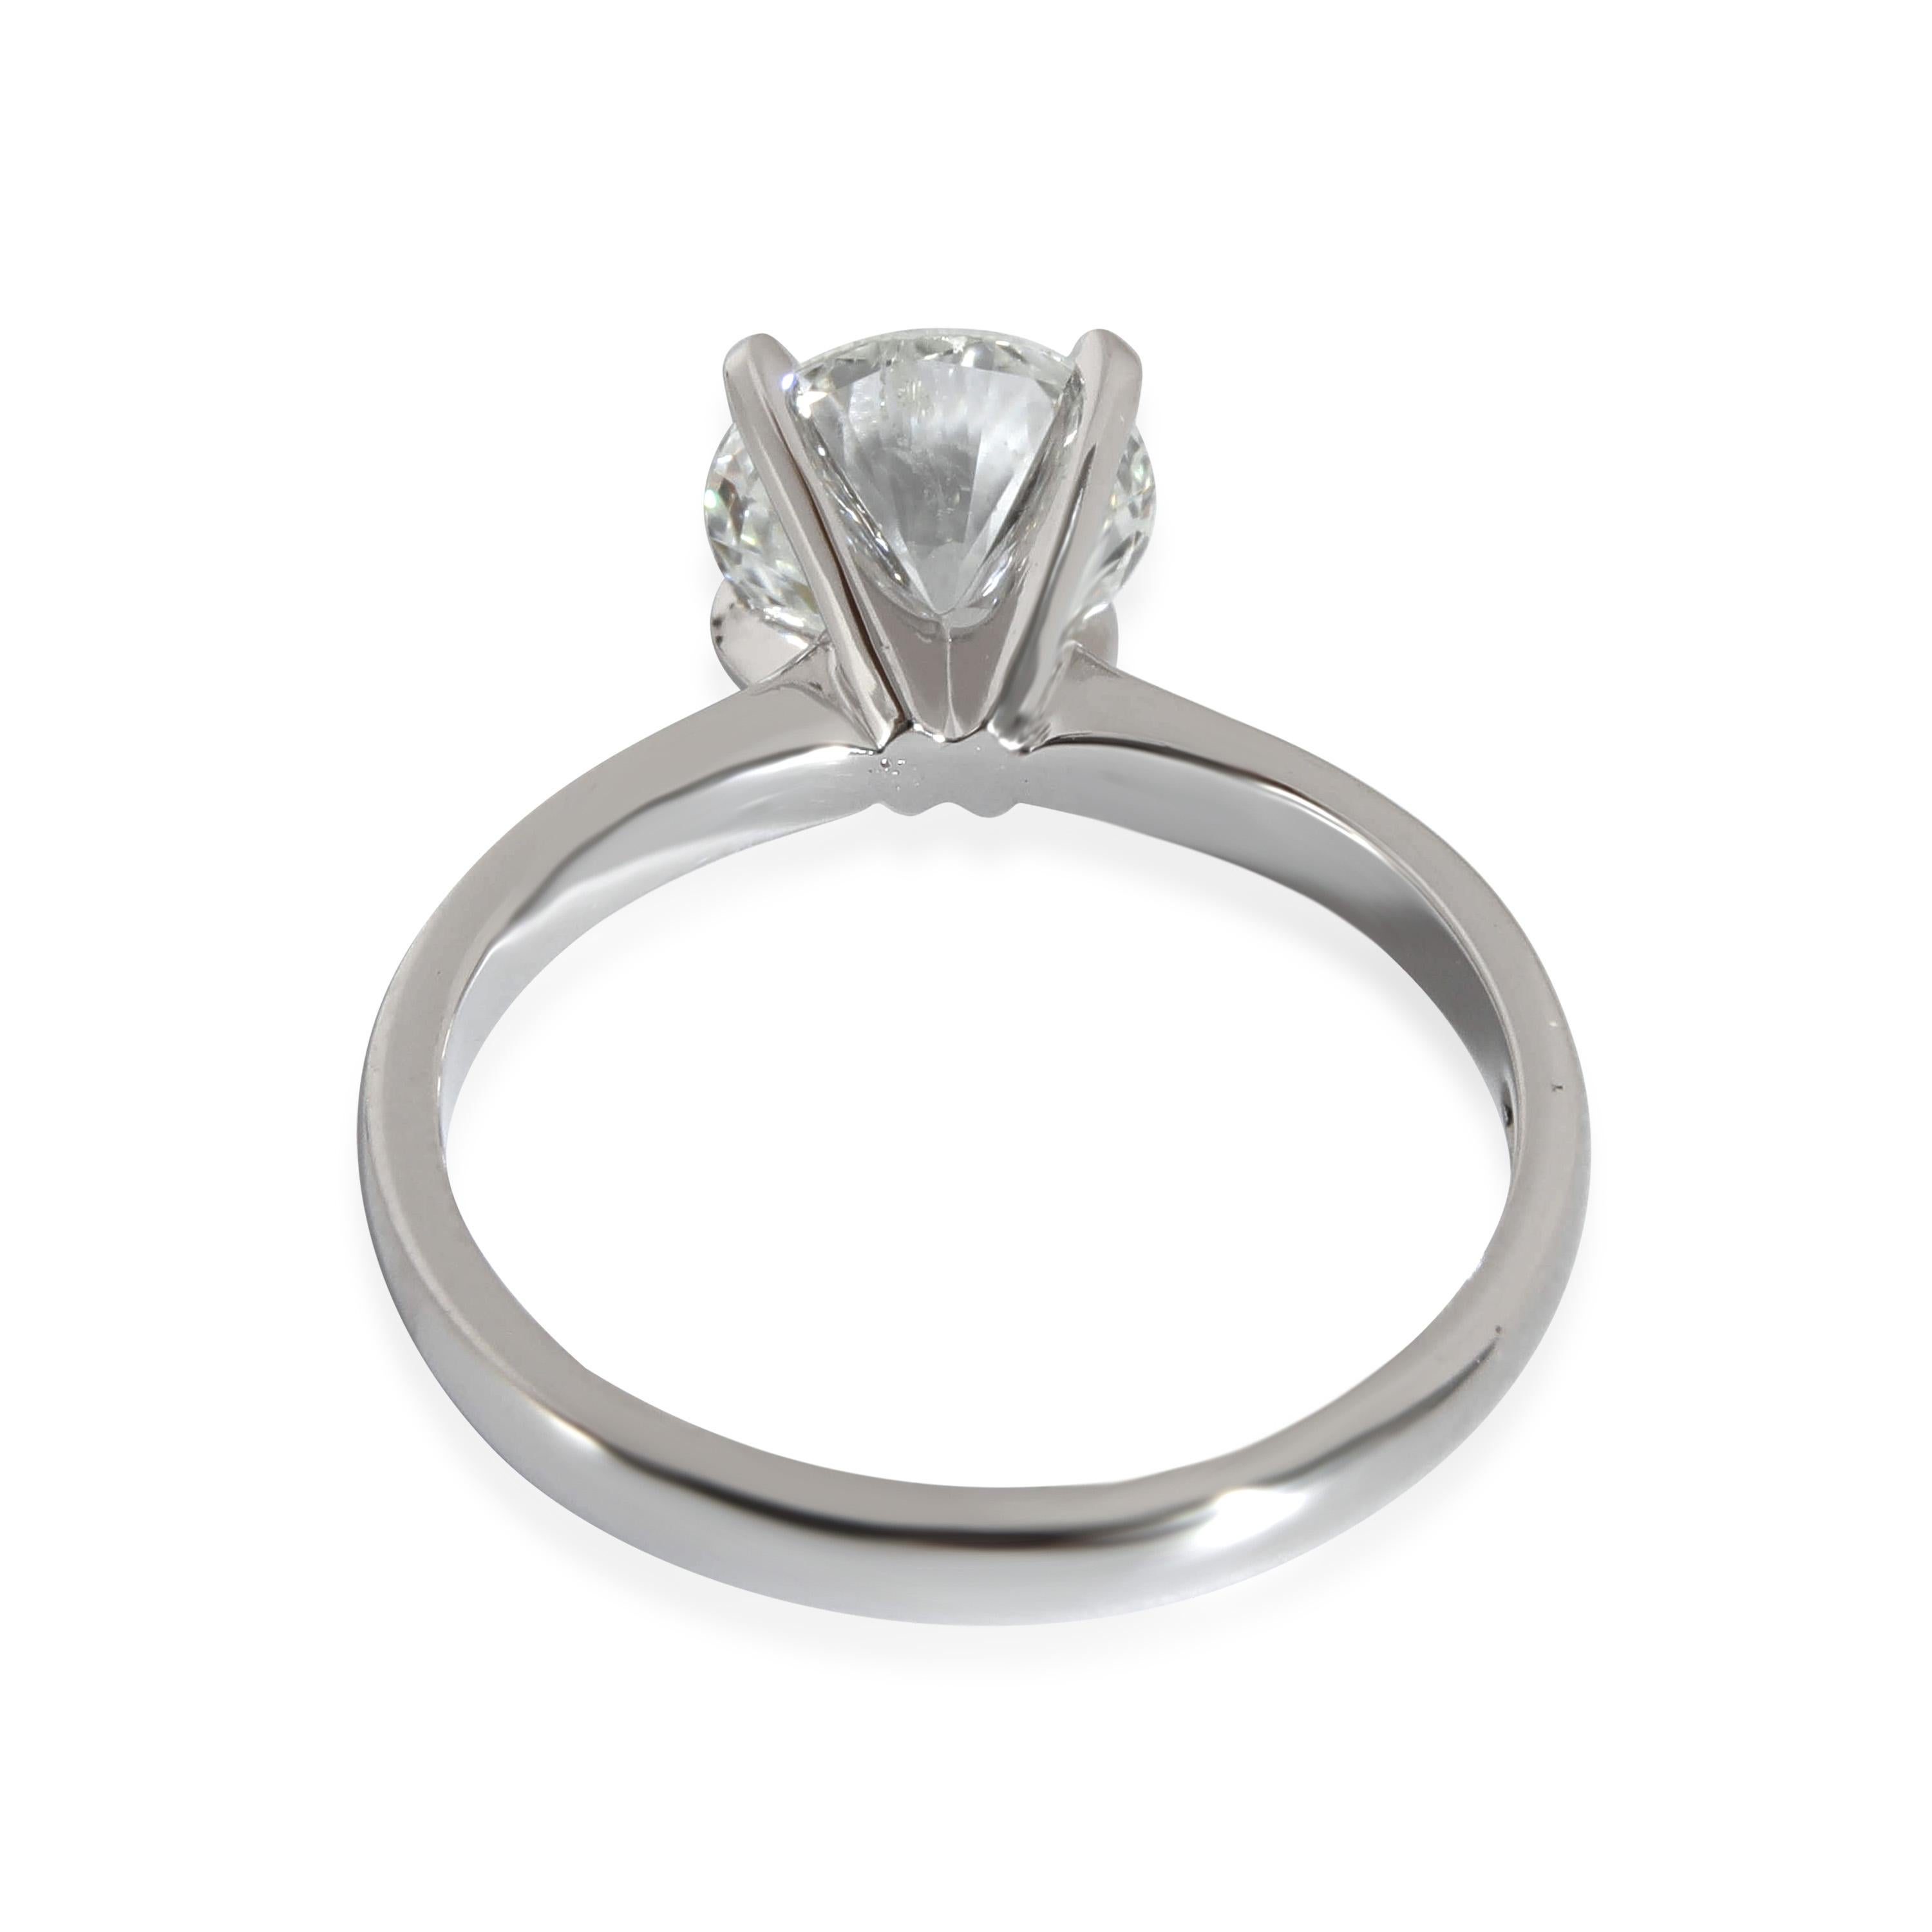 Round Cut Engagement Ring in Platinum D SI1 1.51 CTW

PRIMARY DETAILS
SKU: 131907
Listing Title: Round Cut Engagement Ring in Platinum D SI1 1.51 CTW
Condition Description: Retails for 10995 USD. In excellent condition and recently polished. Ring